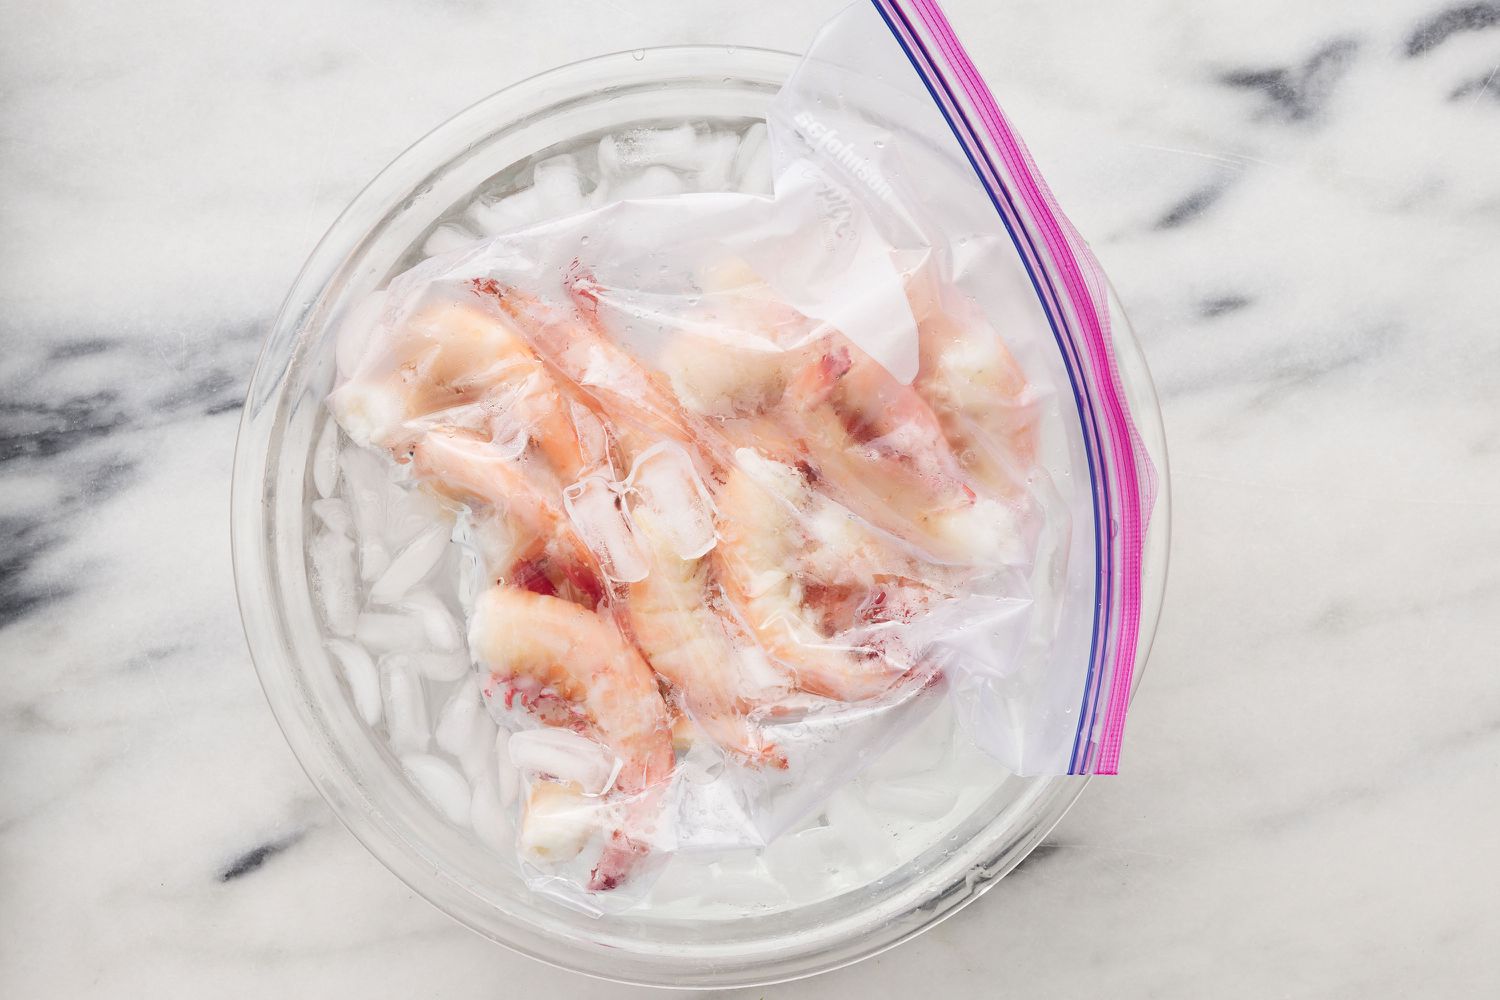 A lock top sealed plastic bag of poached shrimp sitting in a bowl of ice water